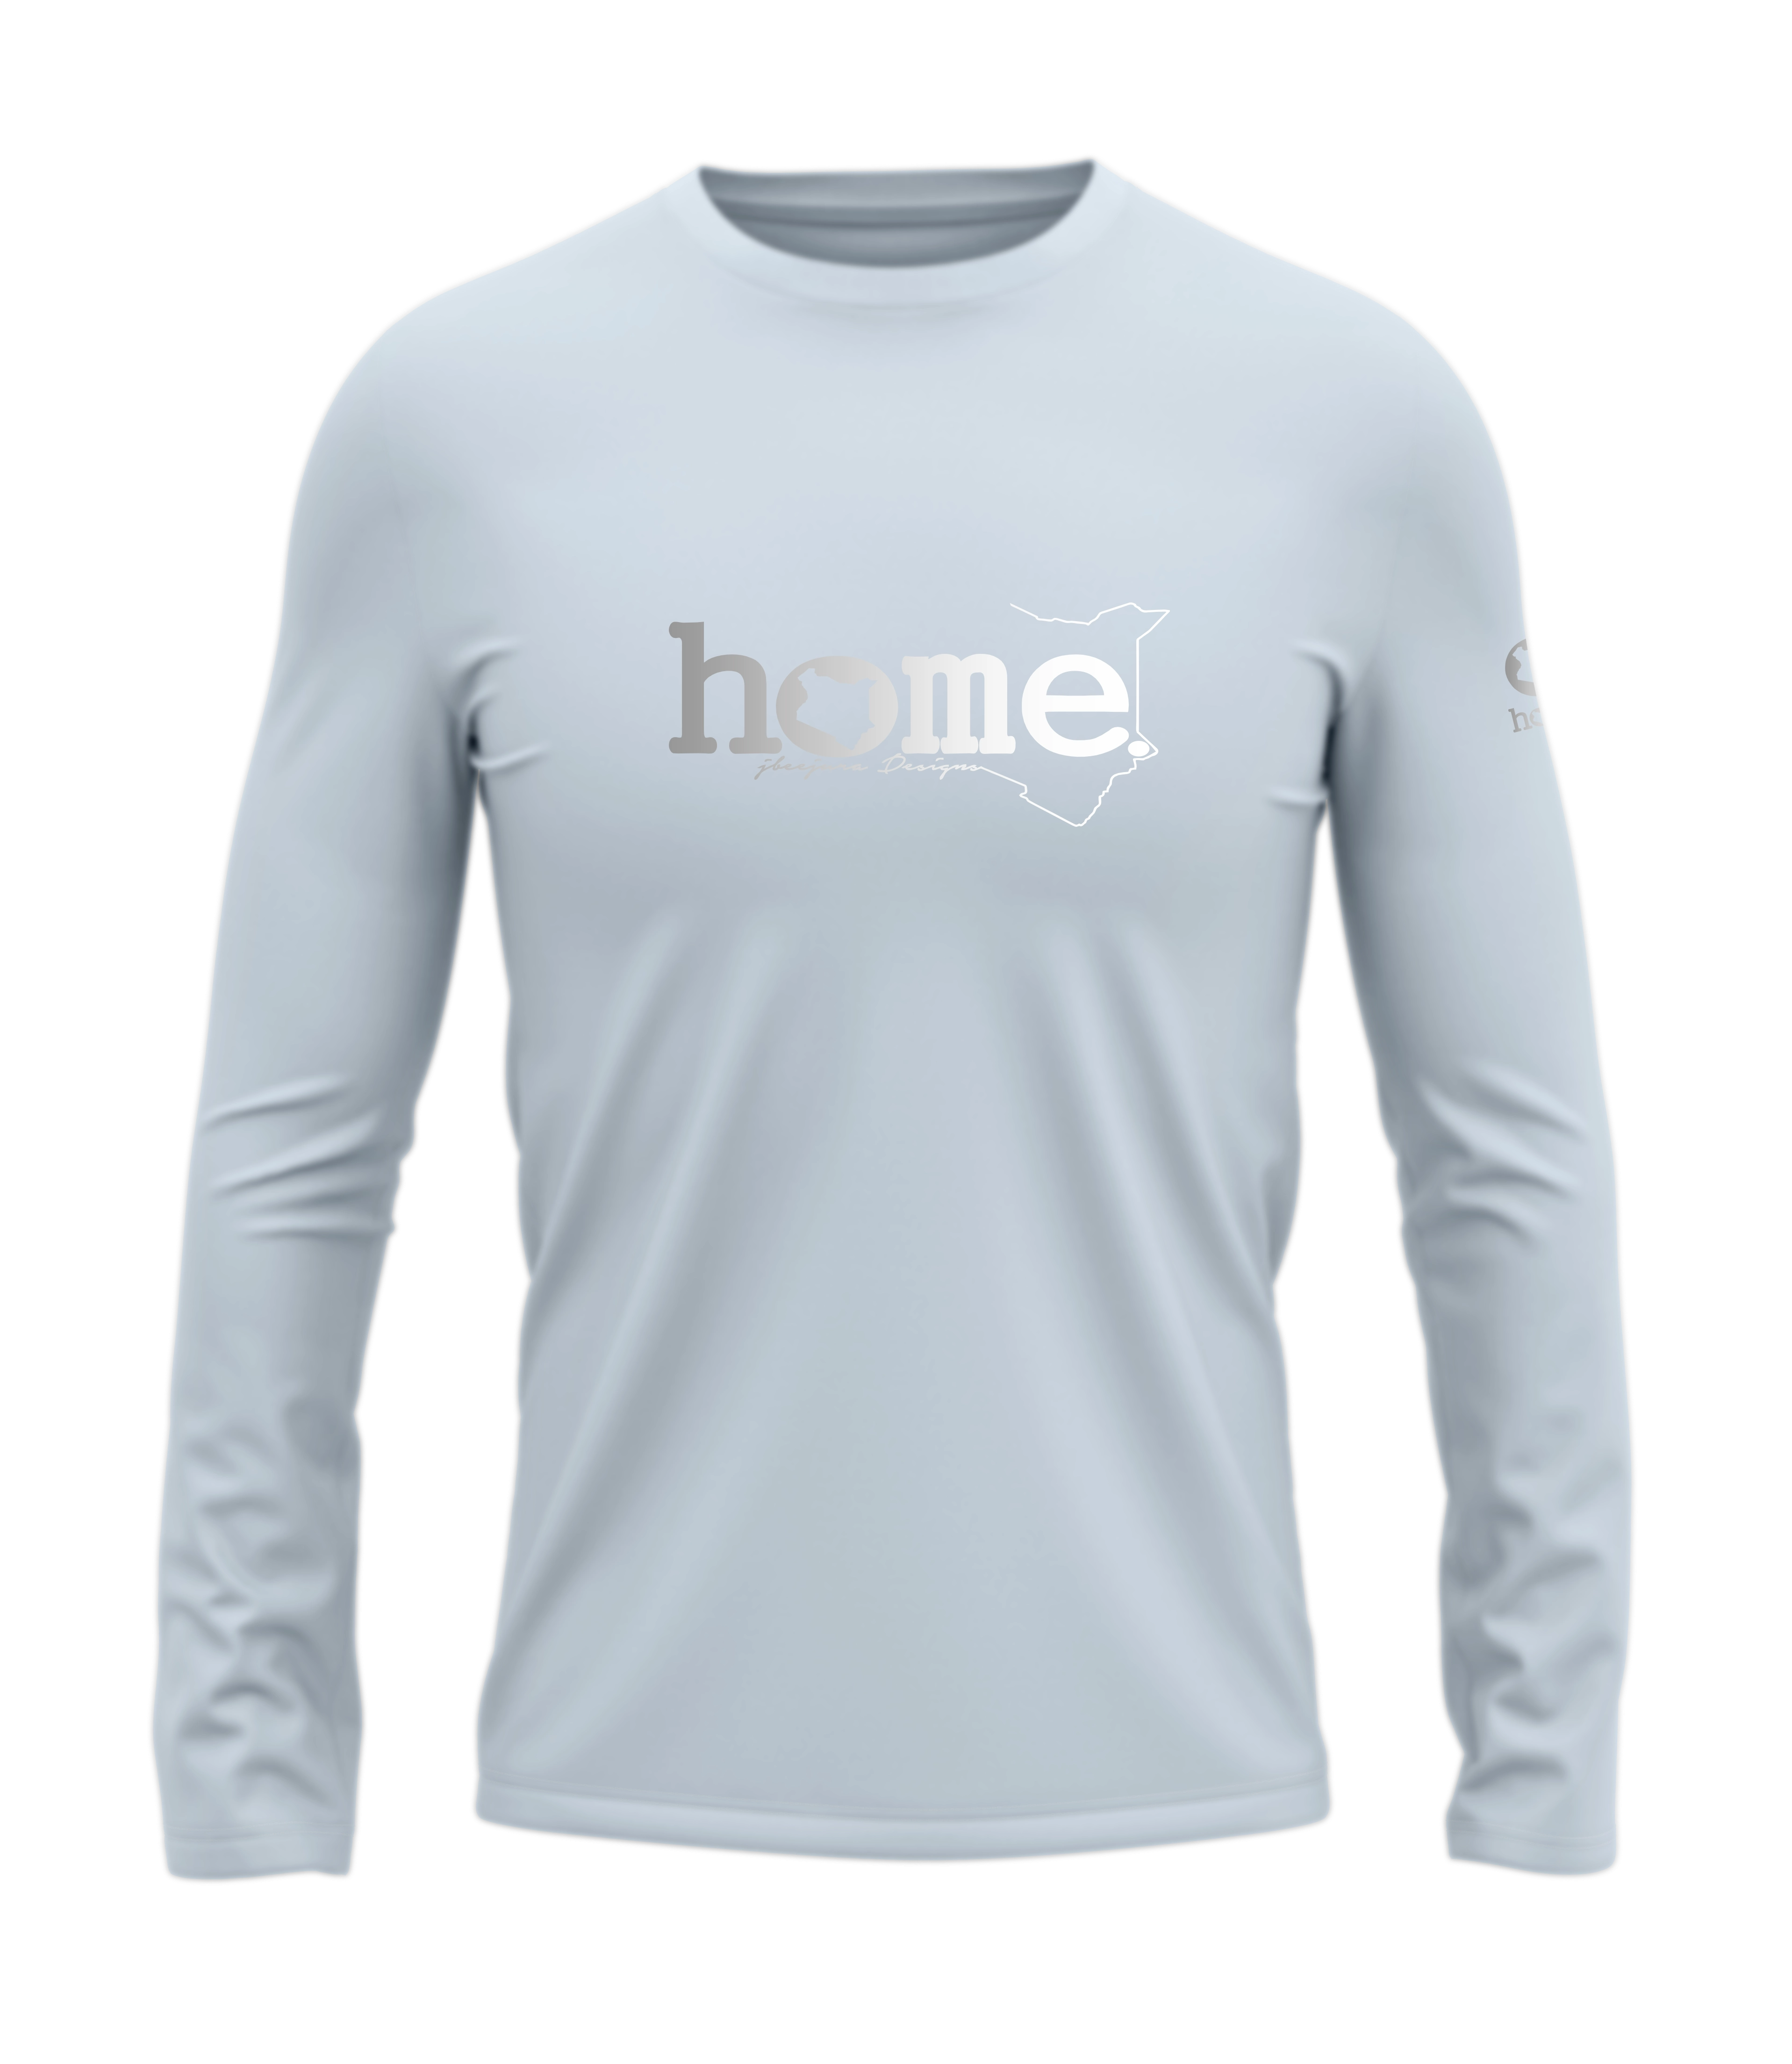 home_254 LONG-SLEEVED SKY-BLUE T-SHIRT WITH A SILVER CLASSIC WORDS PRINT – COTTON PLUS FABRIC